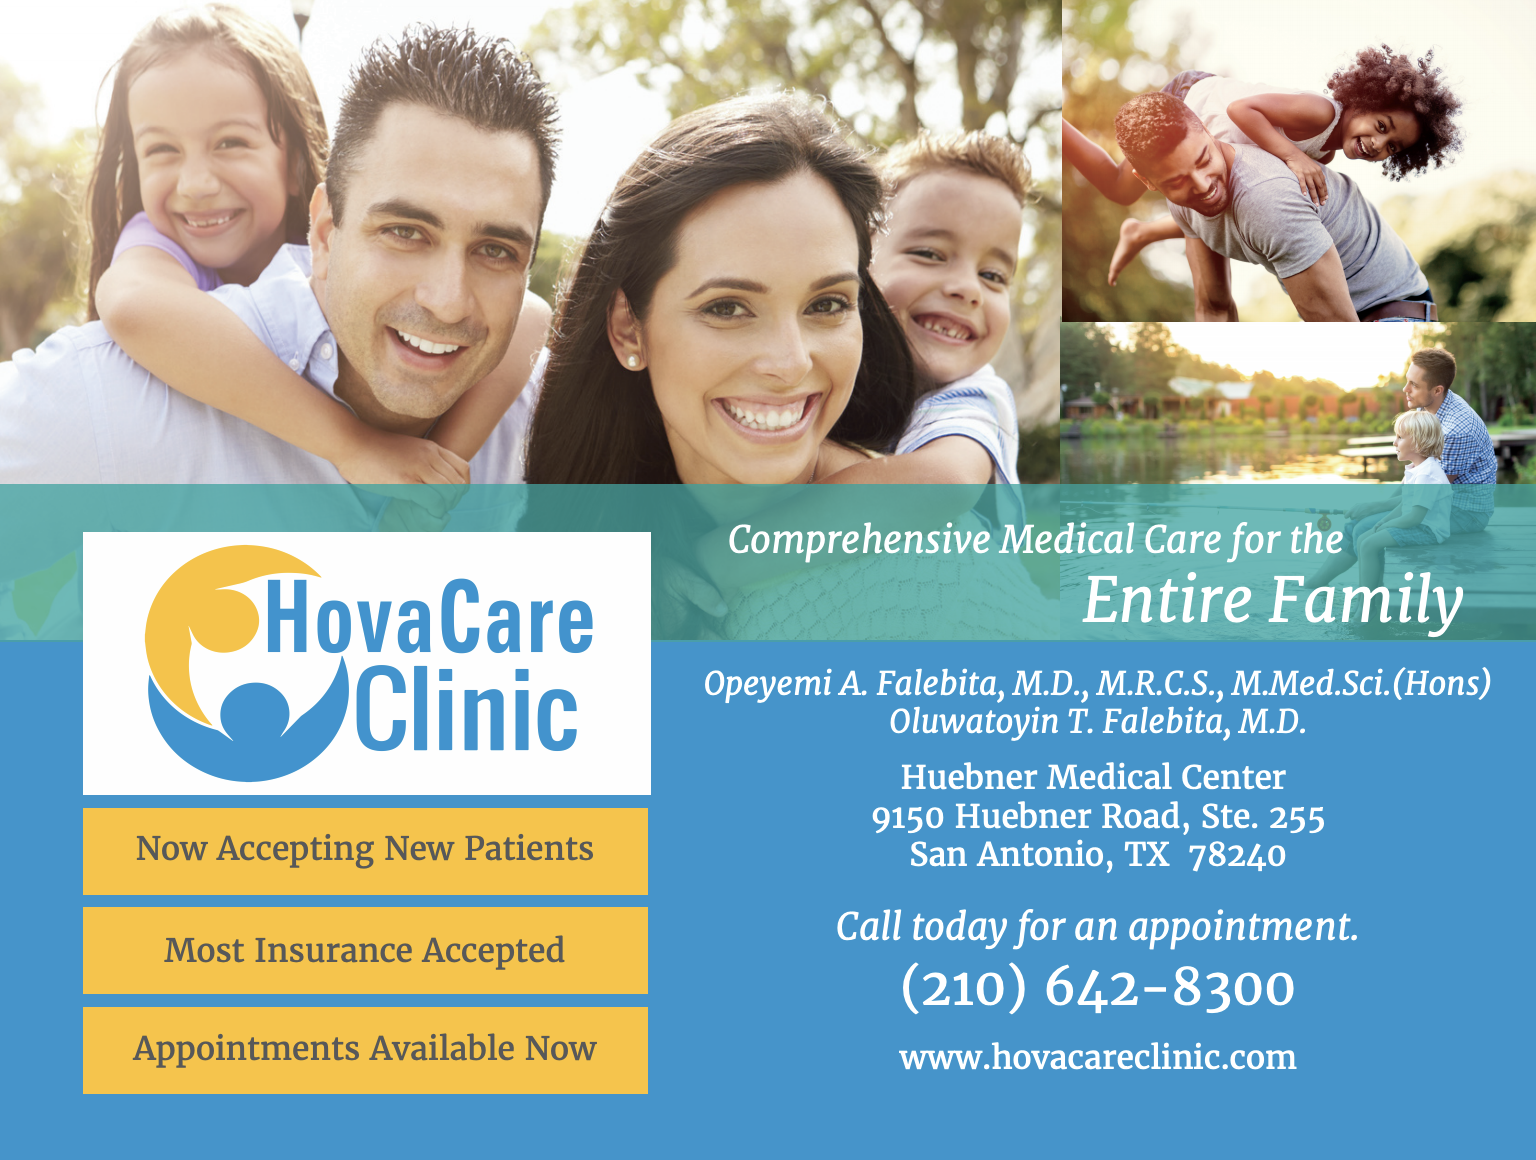 An advertisement for hovacare clinic shows a man carrying two children on his shoulders.